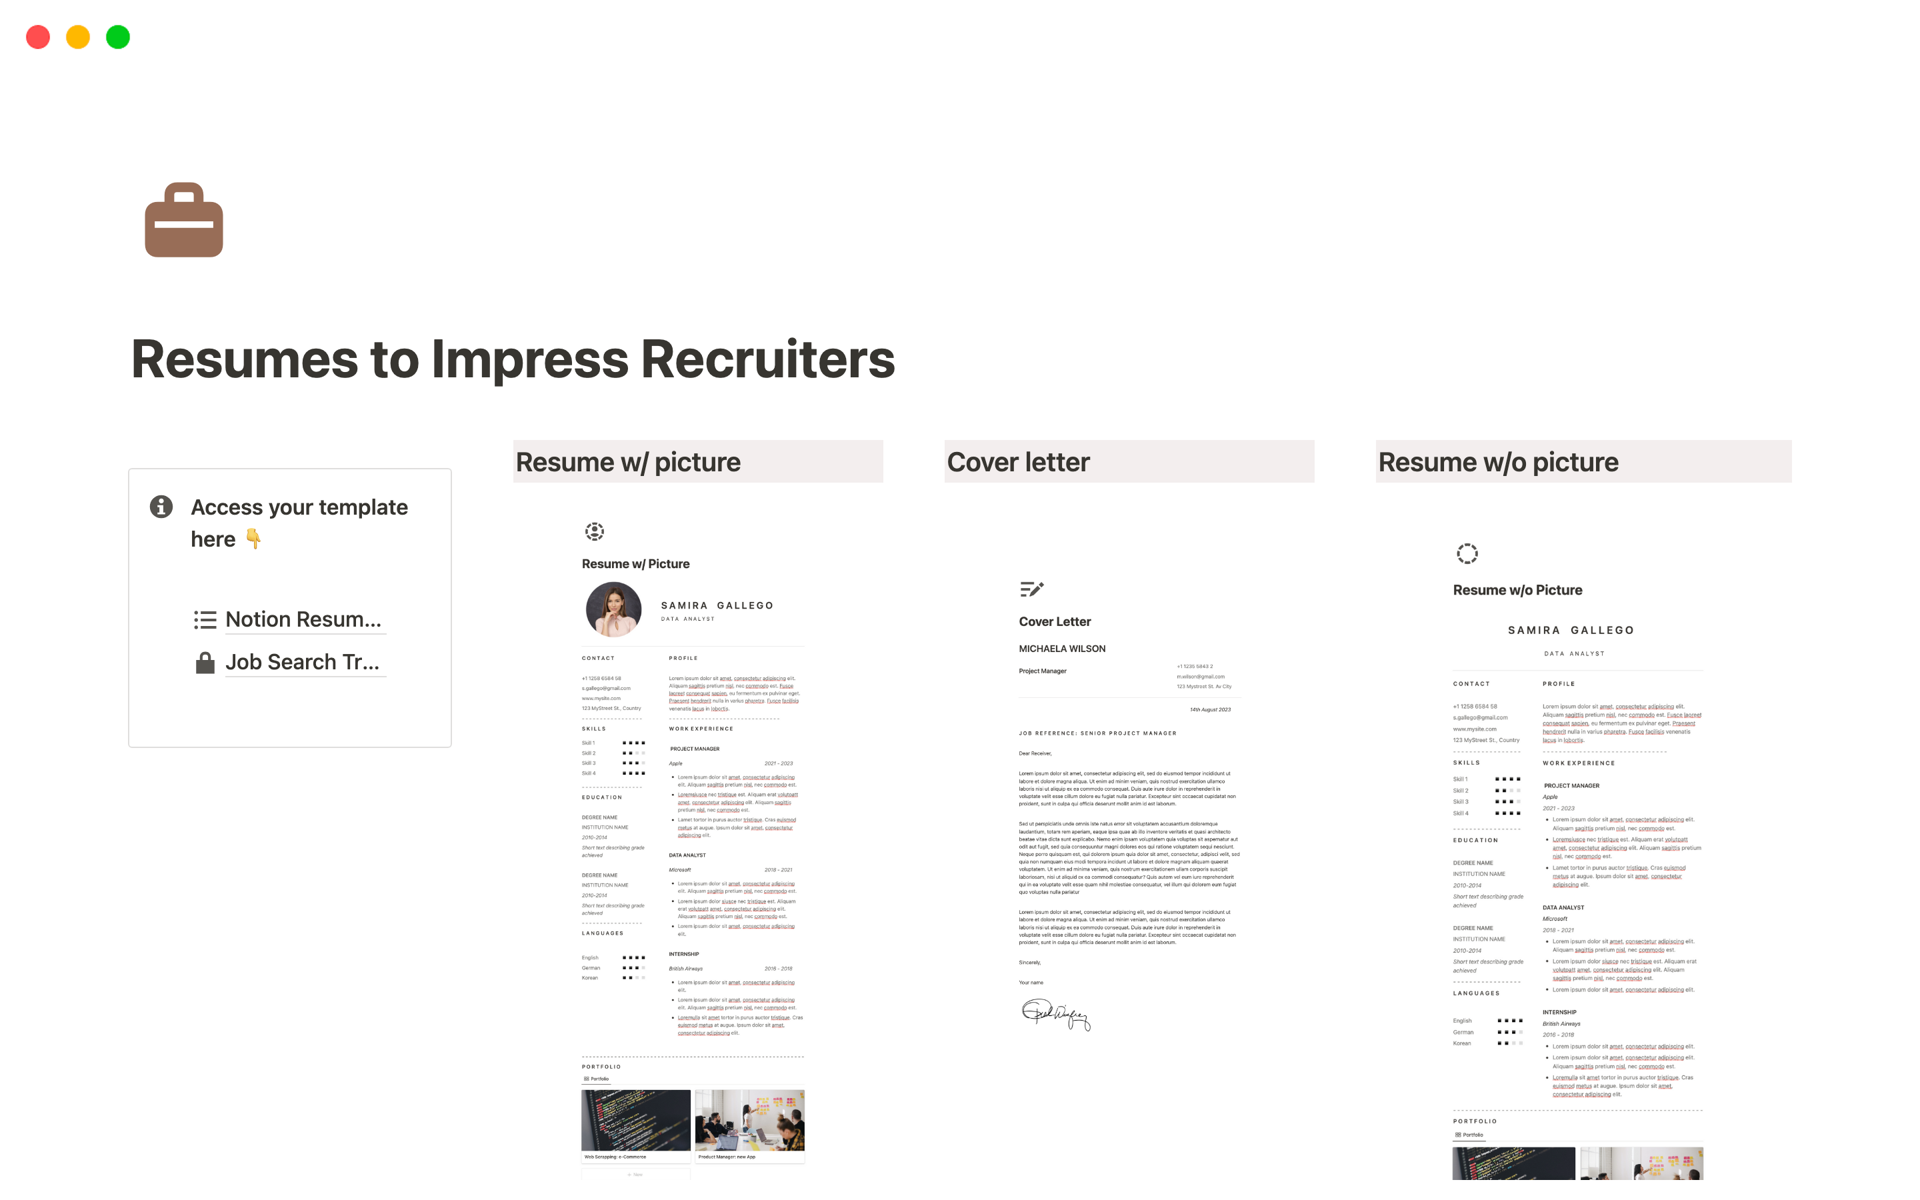 Get ready to impress recruiters and stand out from the crowd with resumes and cover letters that truly reflect you.